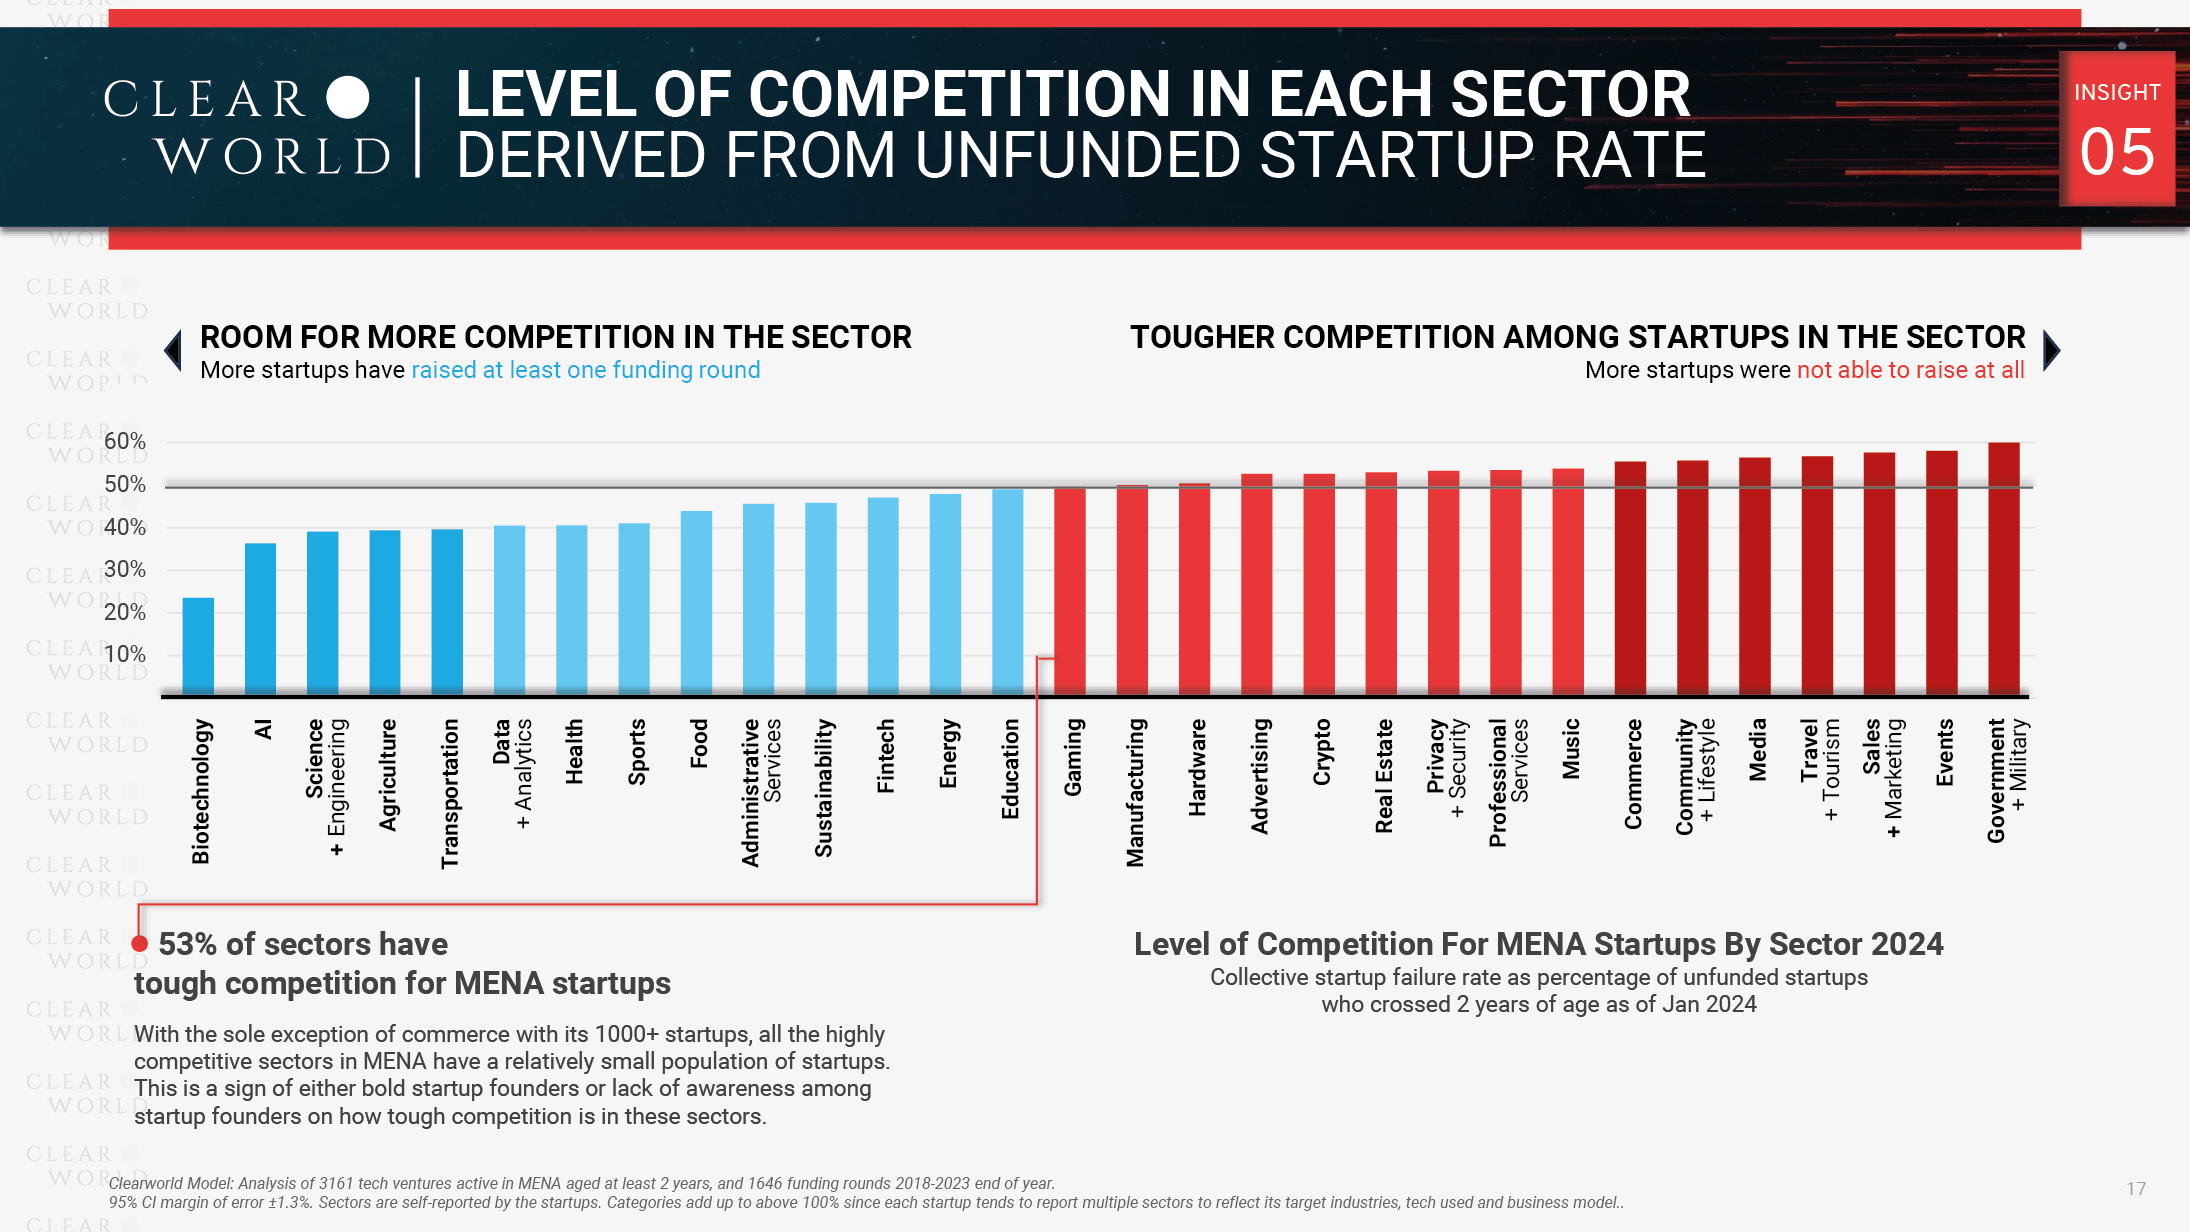 Market Competition Difficulty for MENA Startups by Sector 2024 - Clearworld